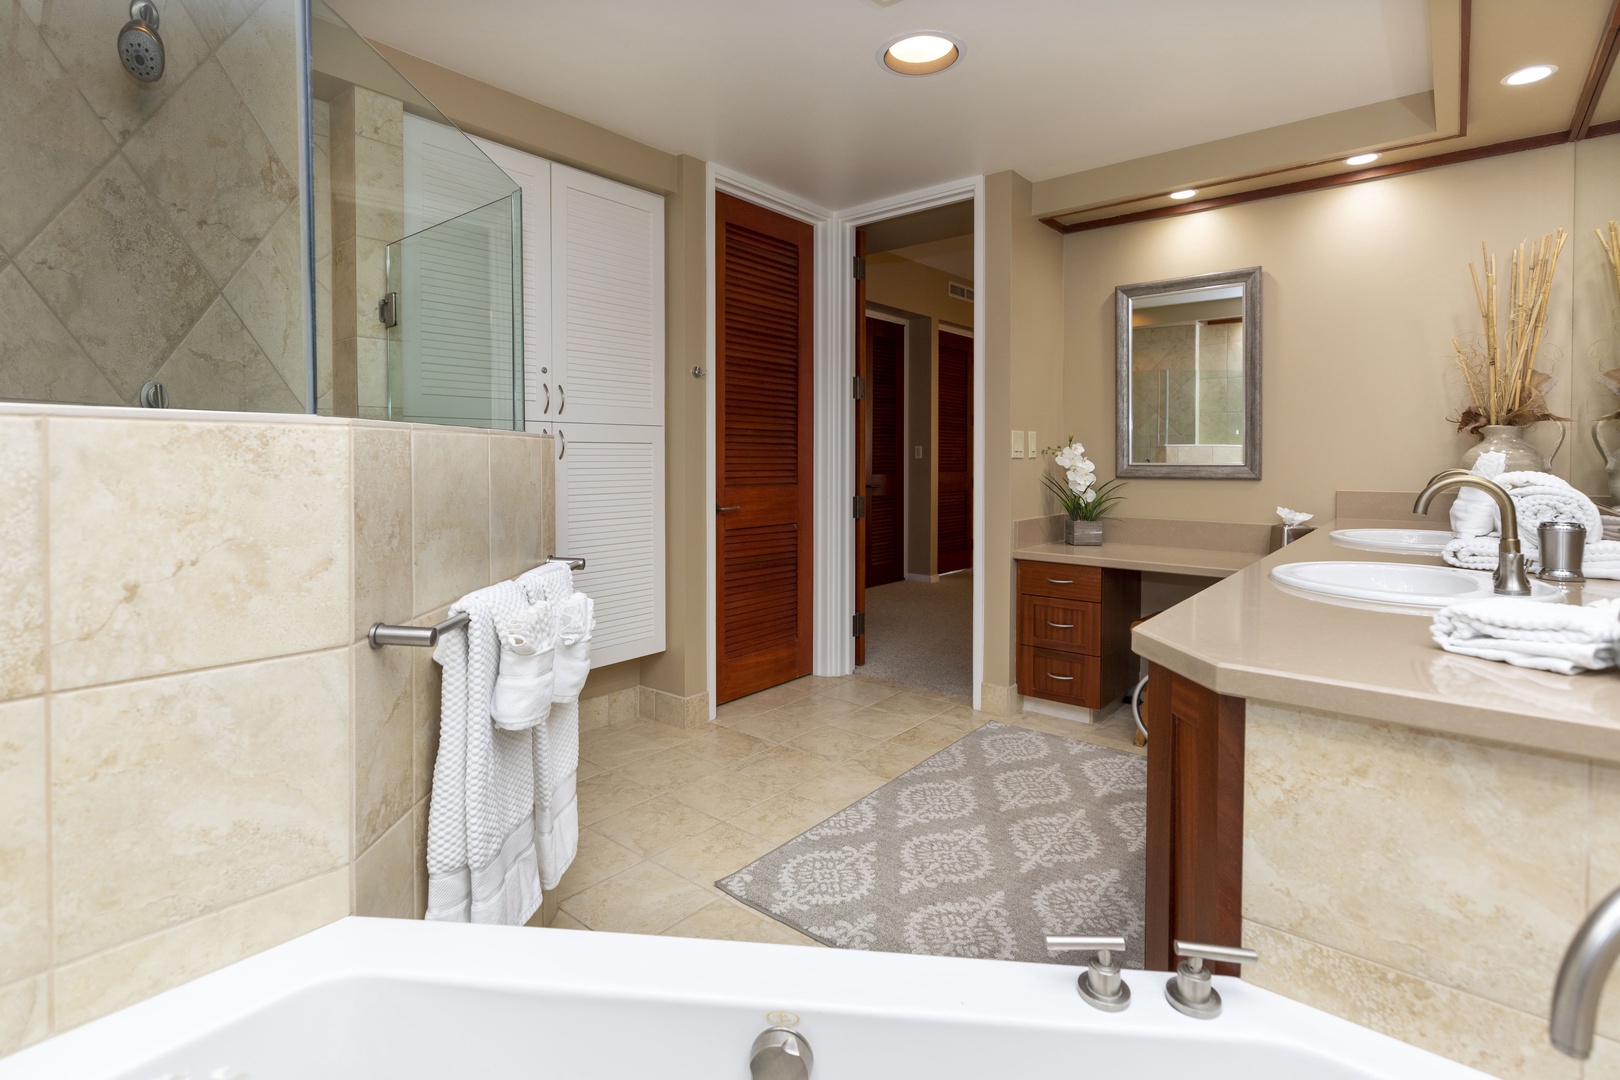 Kamuela Vacation Rentals, Mauna Lani Point E105 - So much to offer in the spacious primary bathroom.